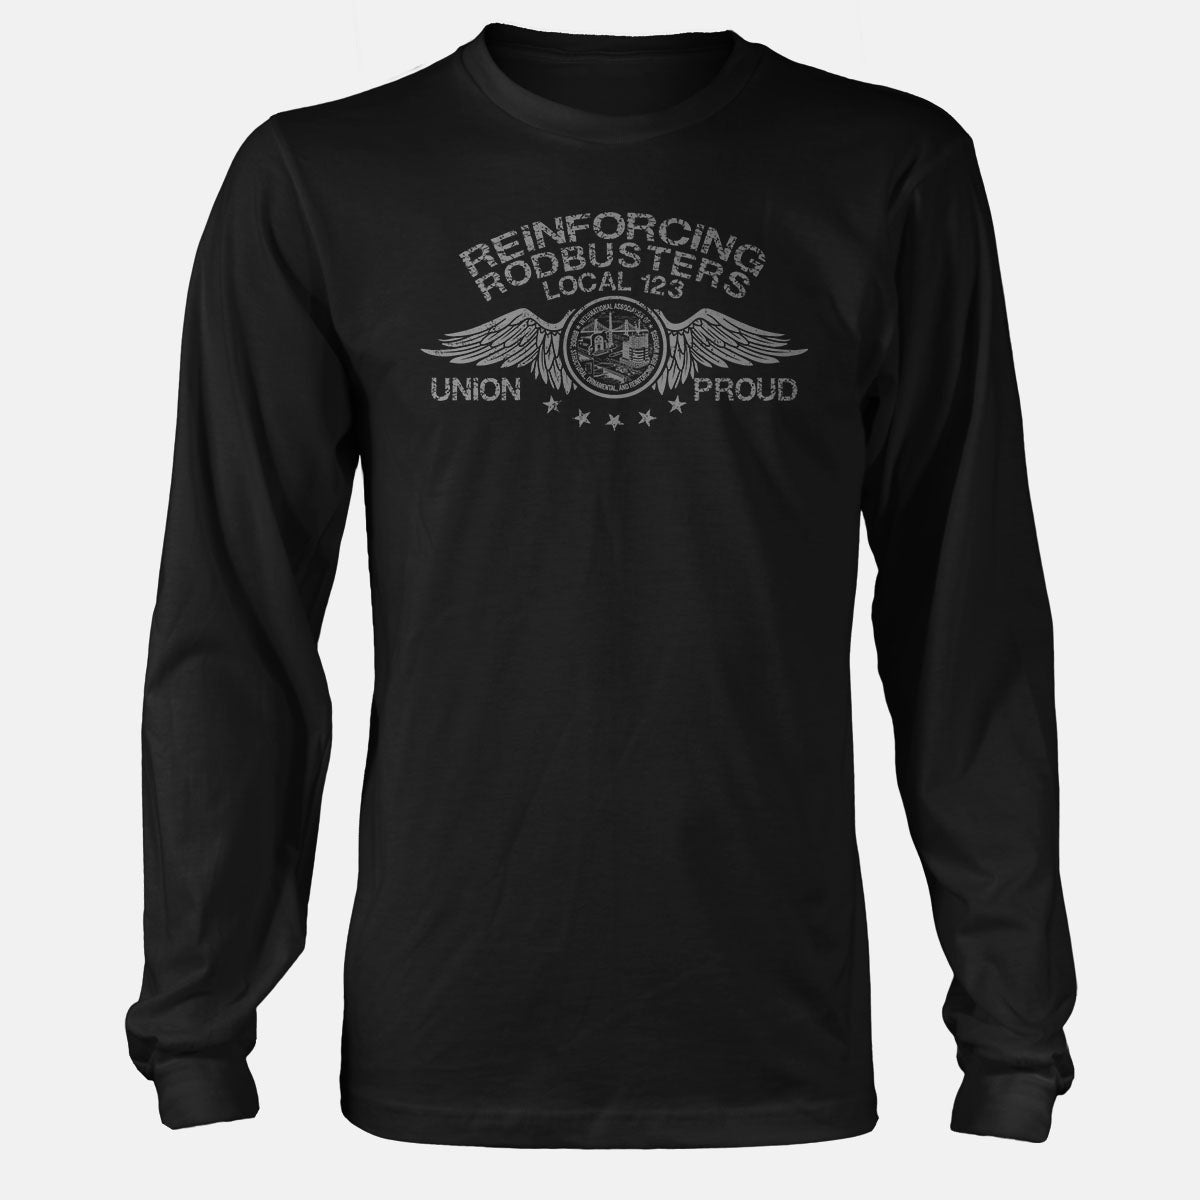 IW Rodbusters Reinforcing Apparel